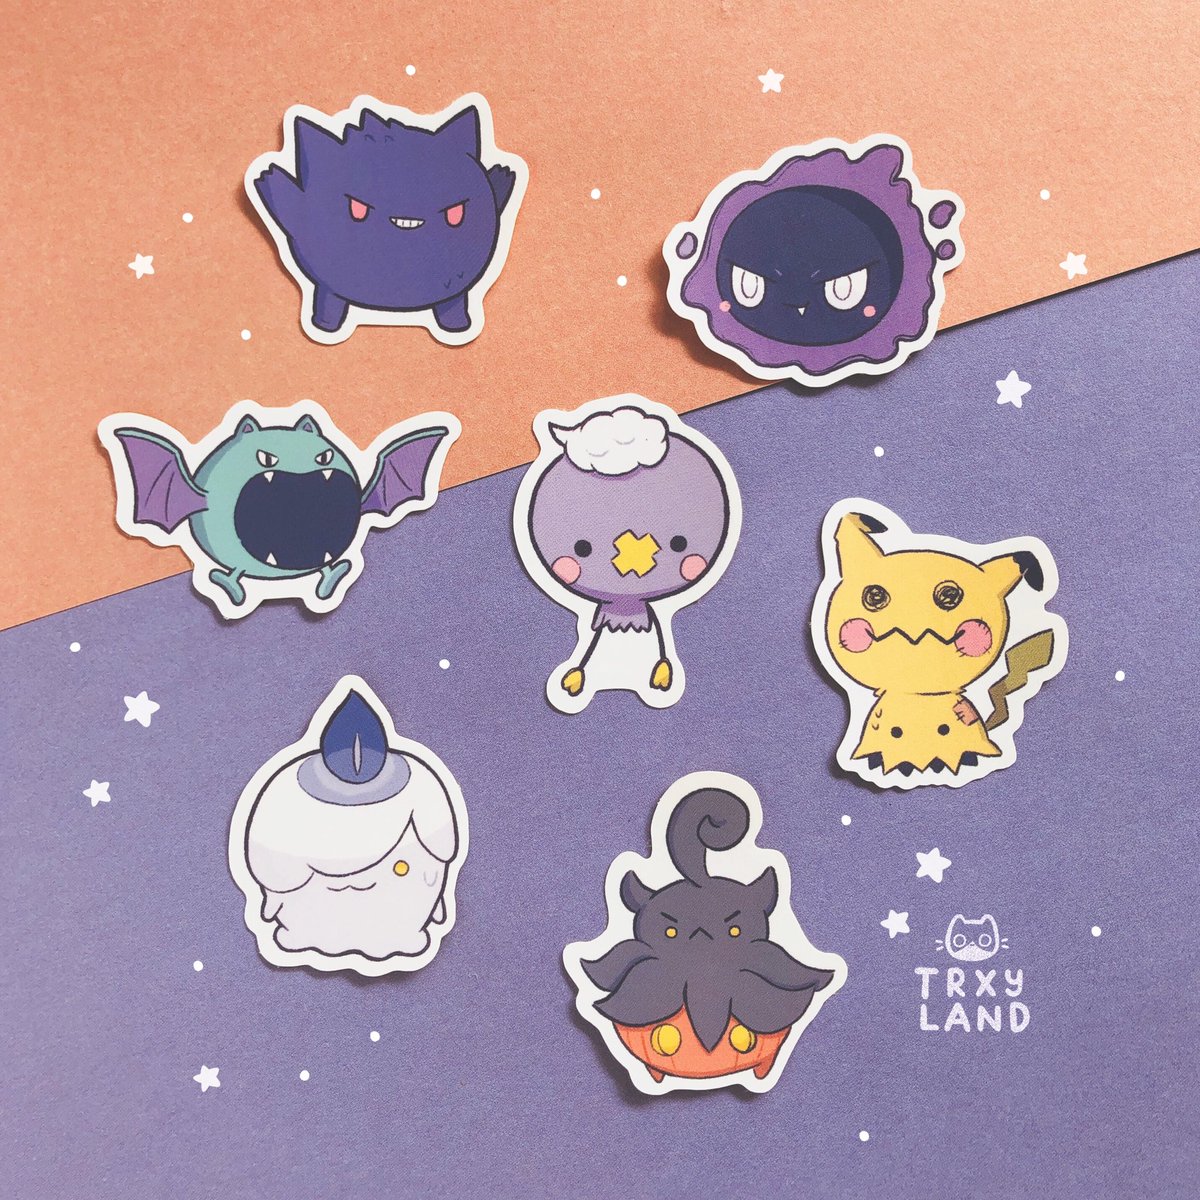 [RTs are ?] Shop update is here! New sticker sheets, spoopy mon stickers & vinyl stickers now available ??

There's also 15% off sticker sheets when you buy 3 or more for the next 1 week! 

Link in thread! 